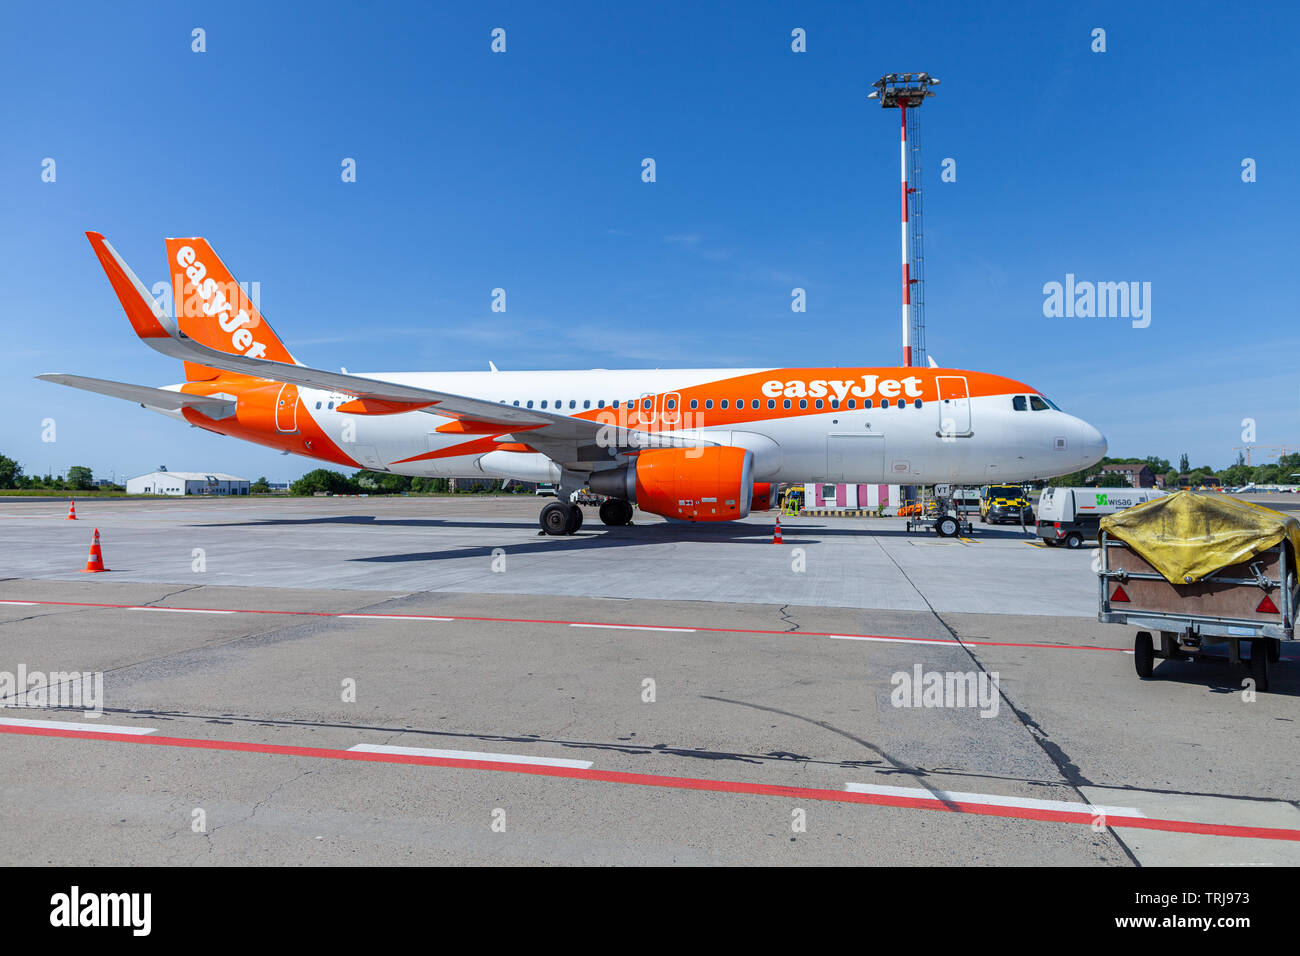 BERLIN SCHONEFELD / GERMANY - MAY 30, 2019: Airbus A320-200 from the easyjet airline stands at airfield on Berlin Schonefeld Airport. Stock Photo